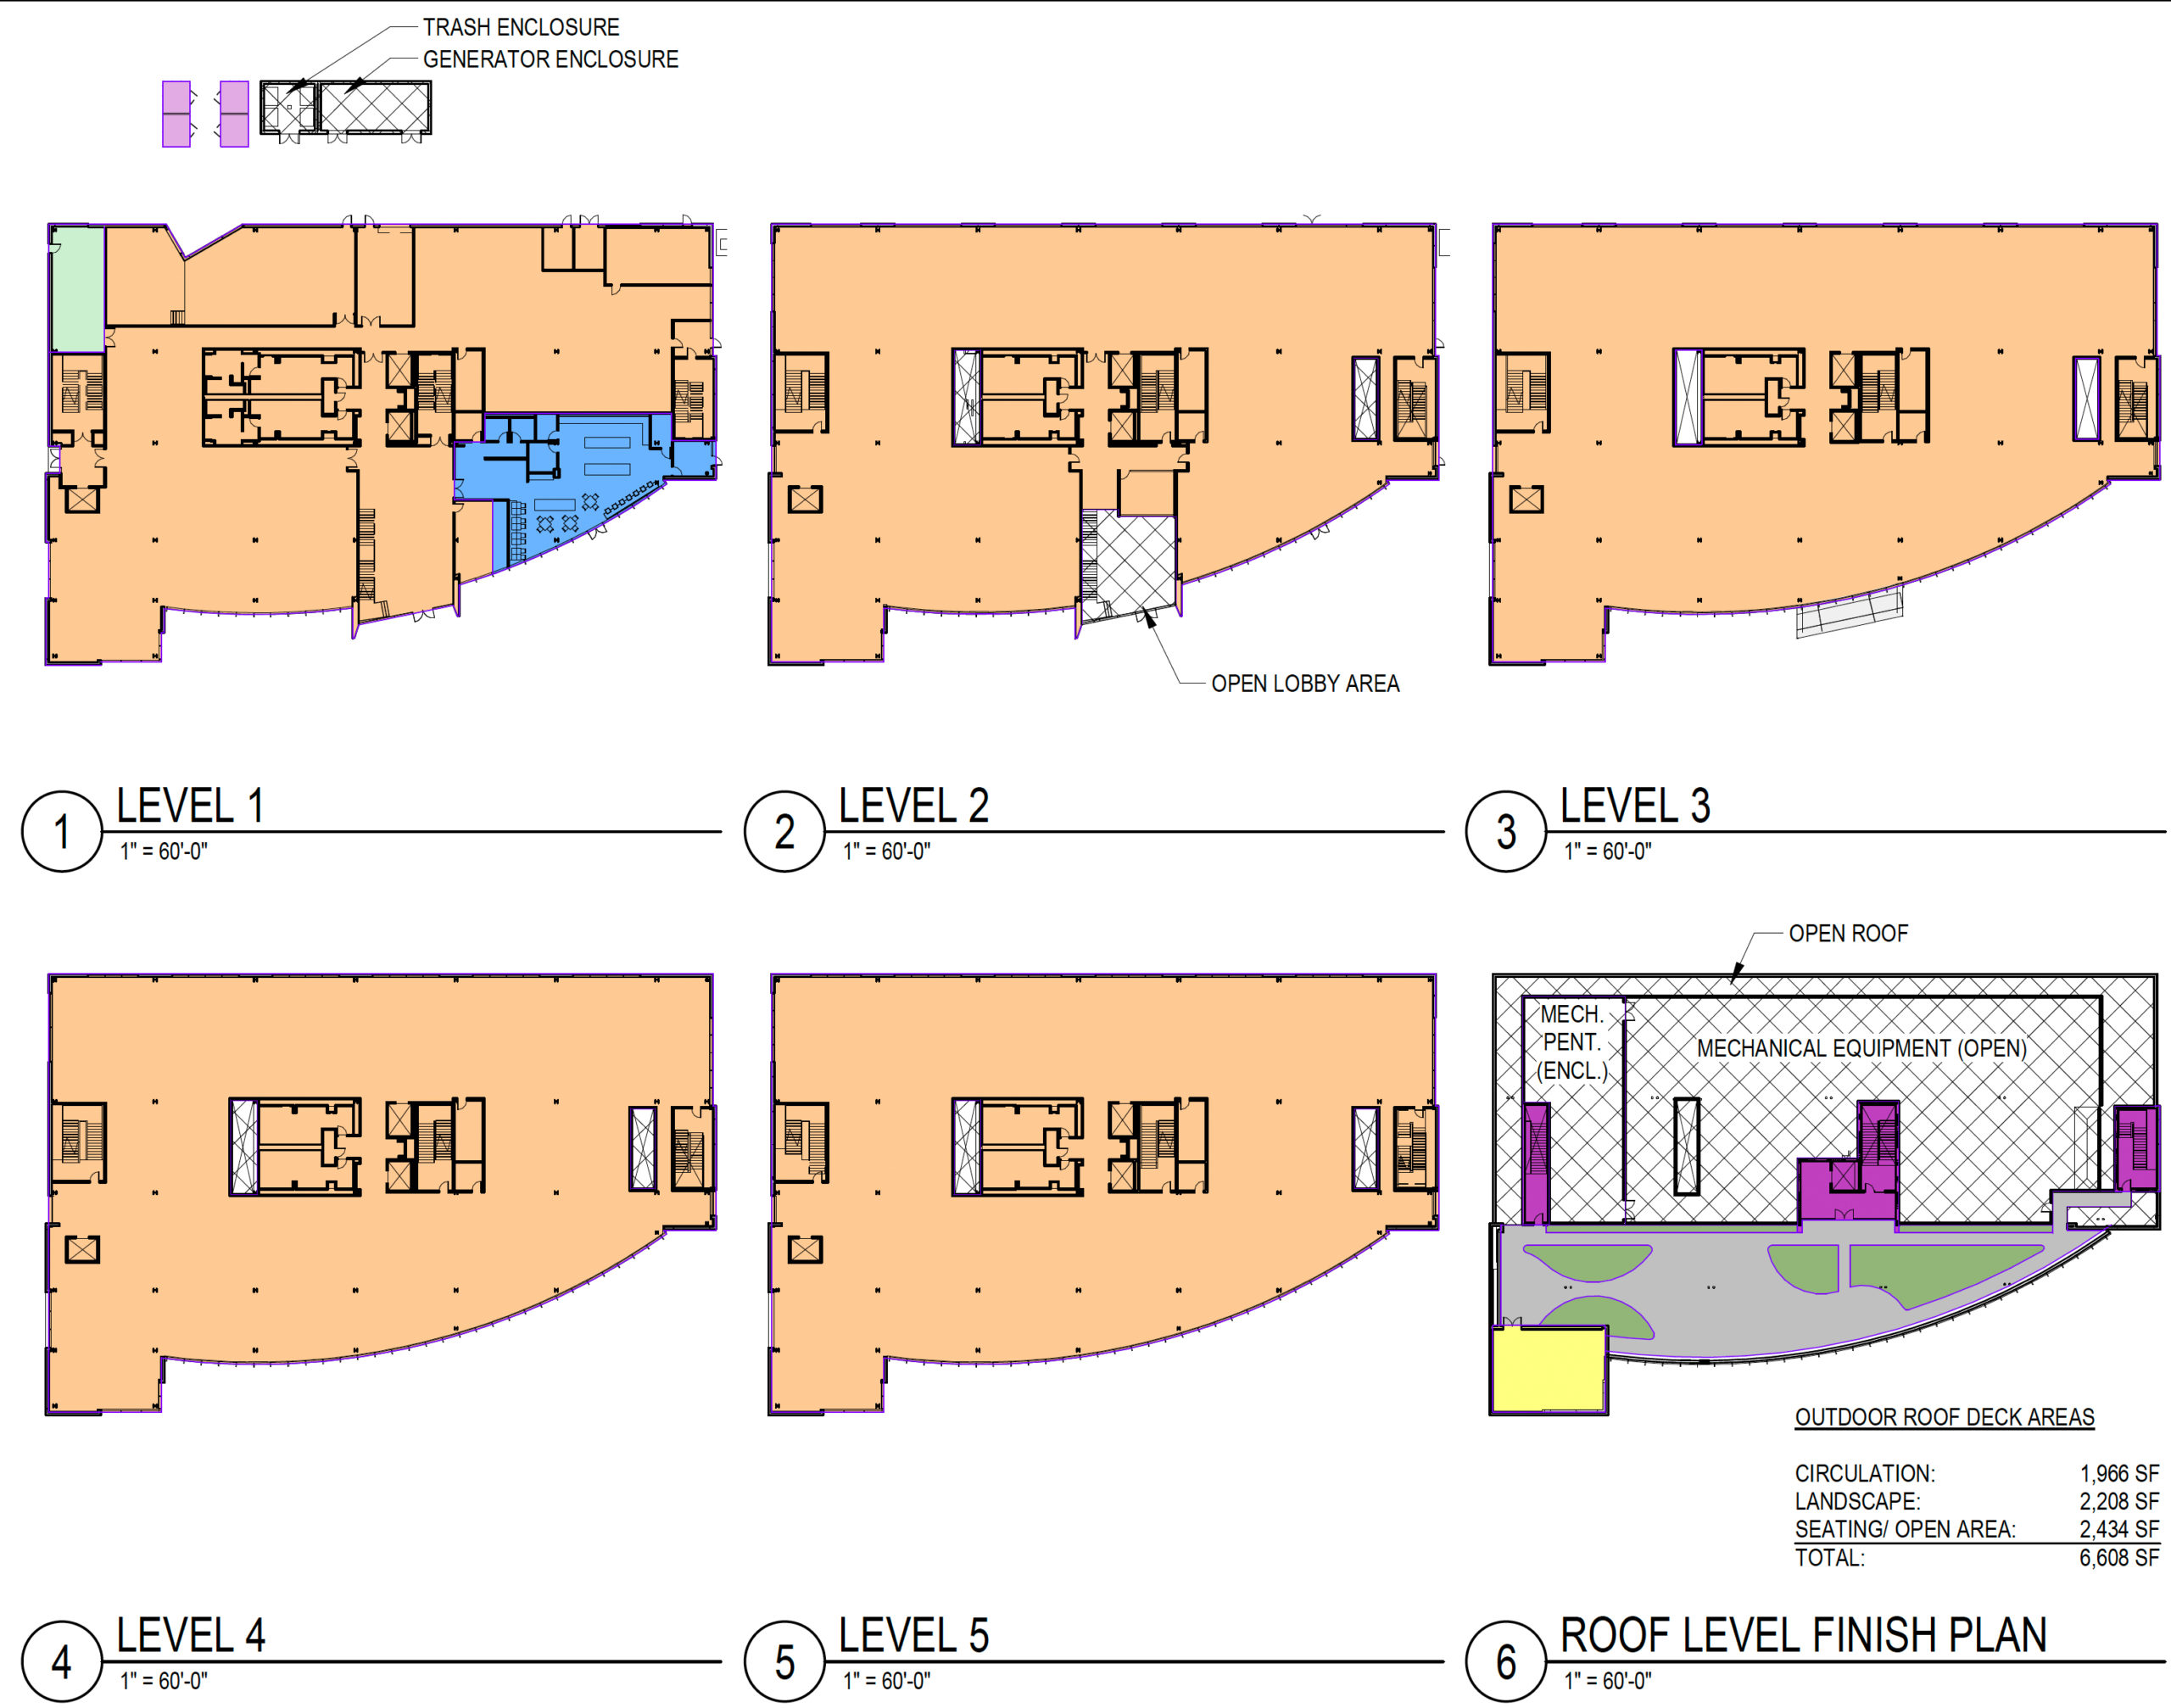 1125 O’Brien Drive floor plans, rendering by DES Architects